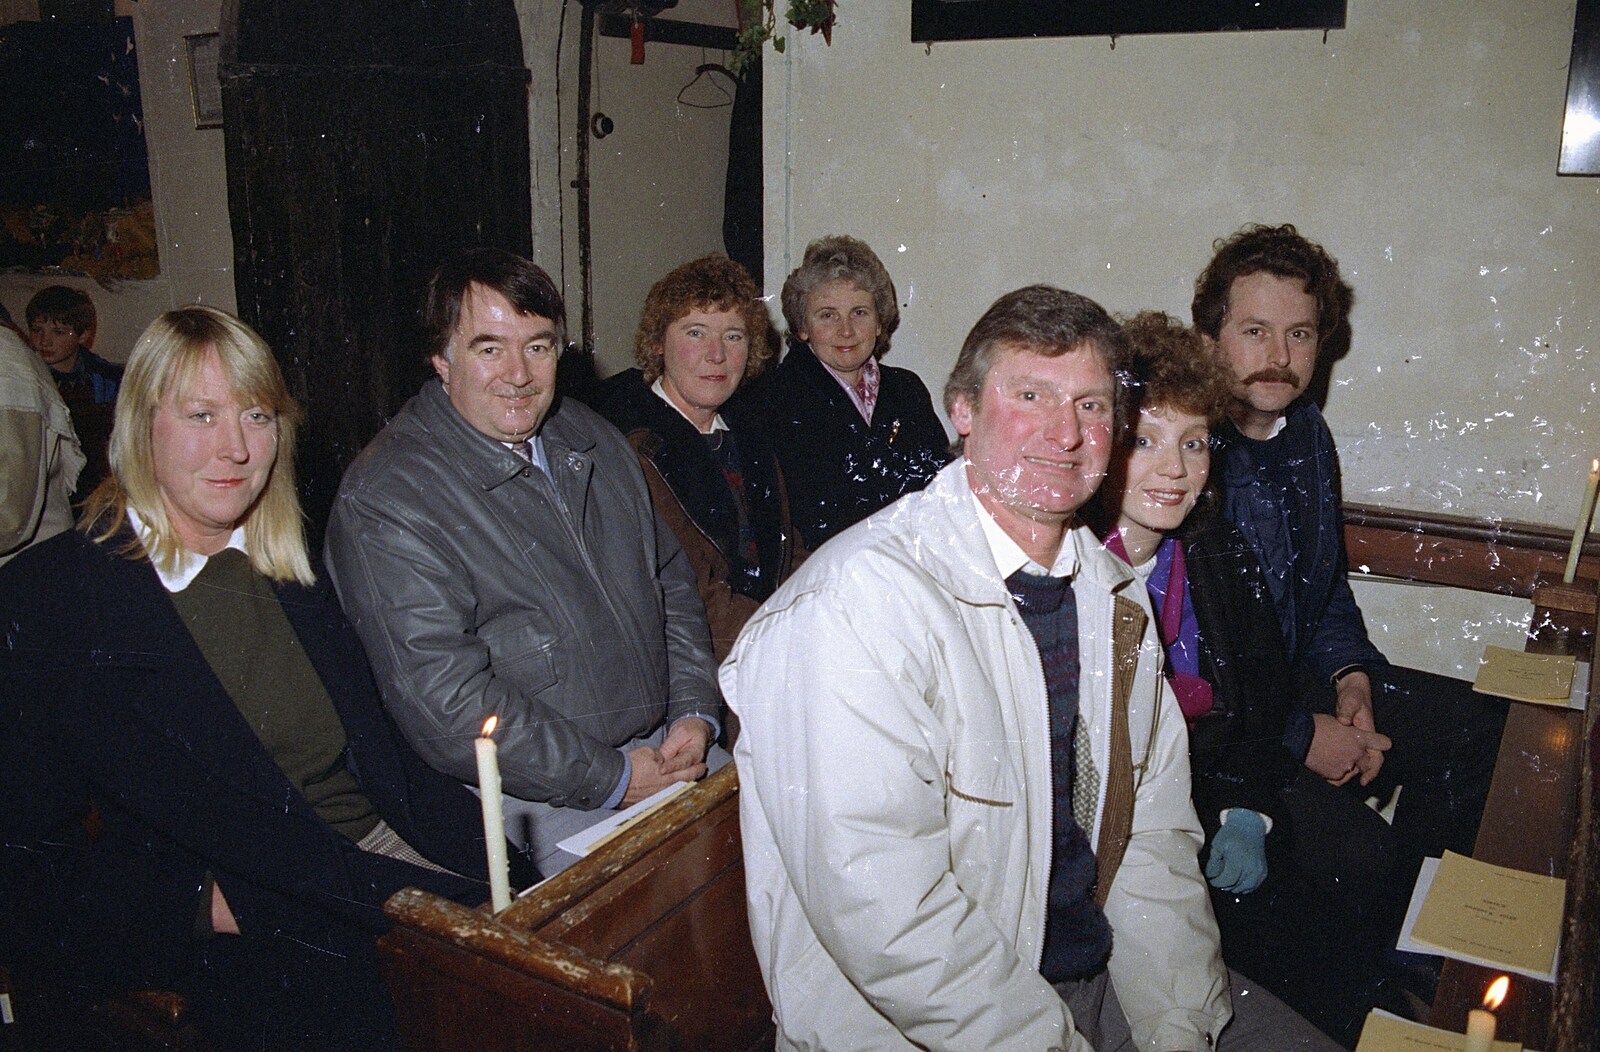 'Mad' Sue and the gang in Stuston church from Clays Does Bruges, Belgium - 19th December 1992